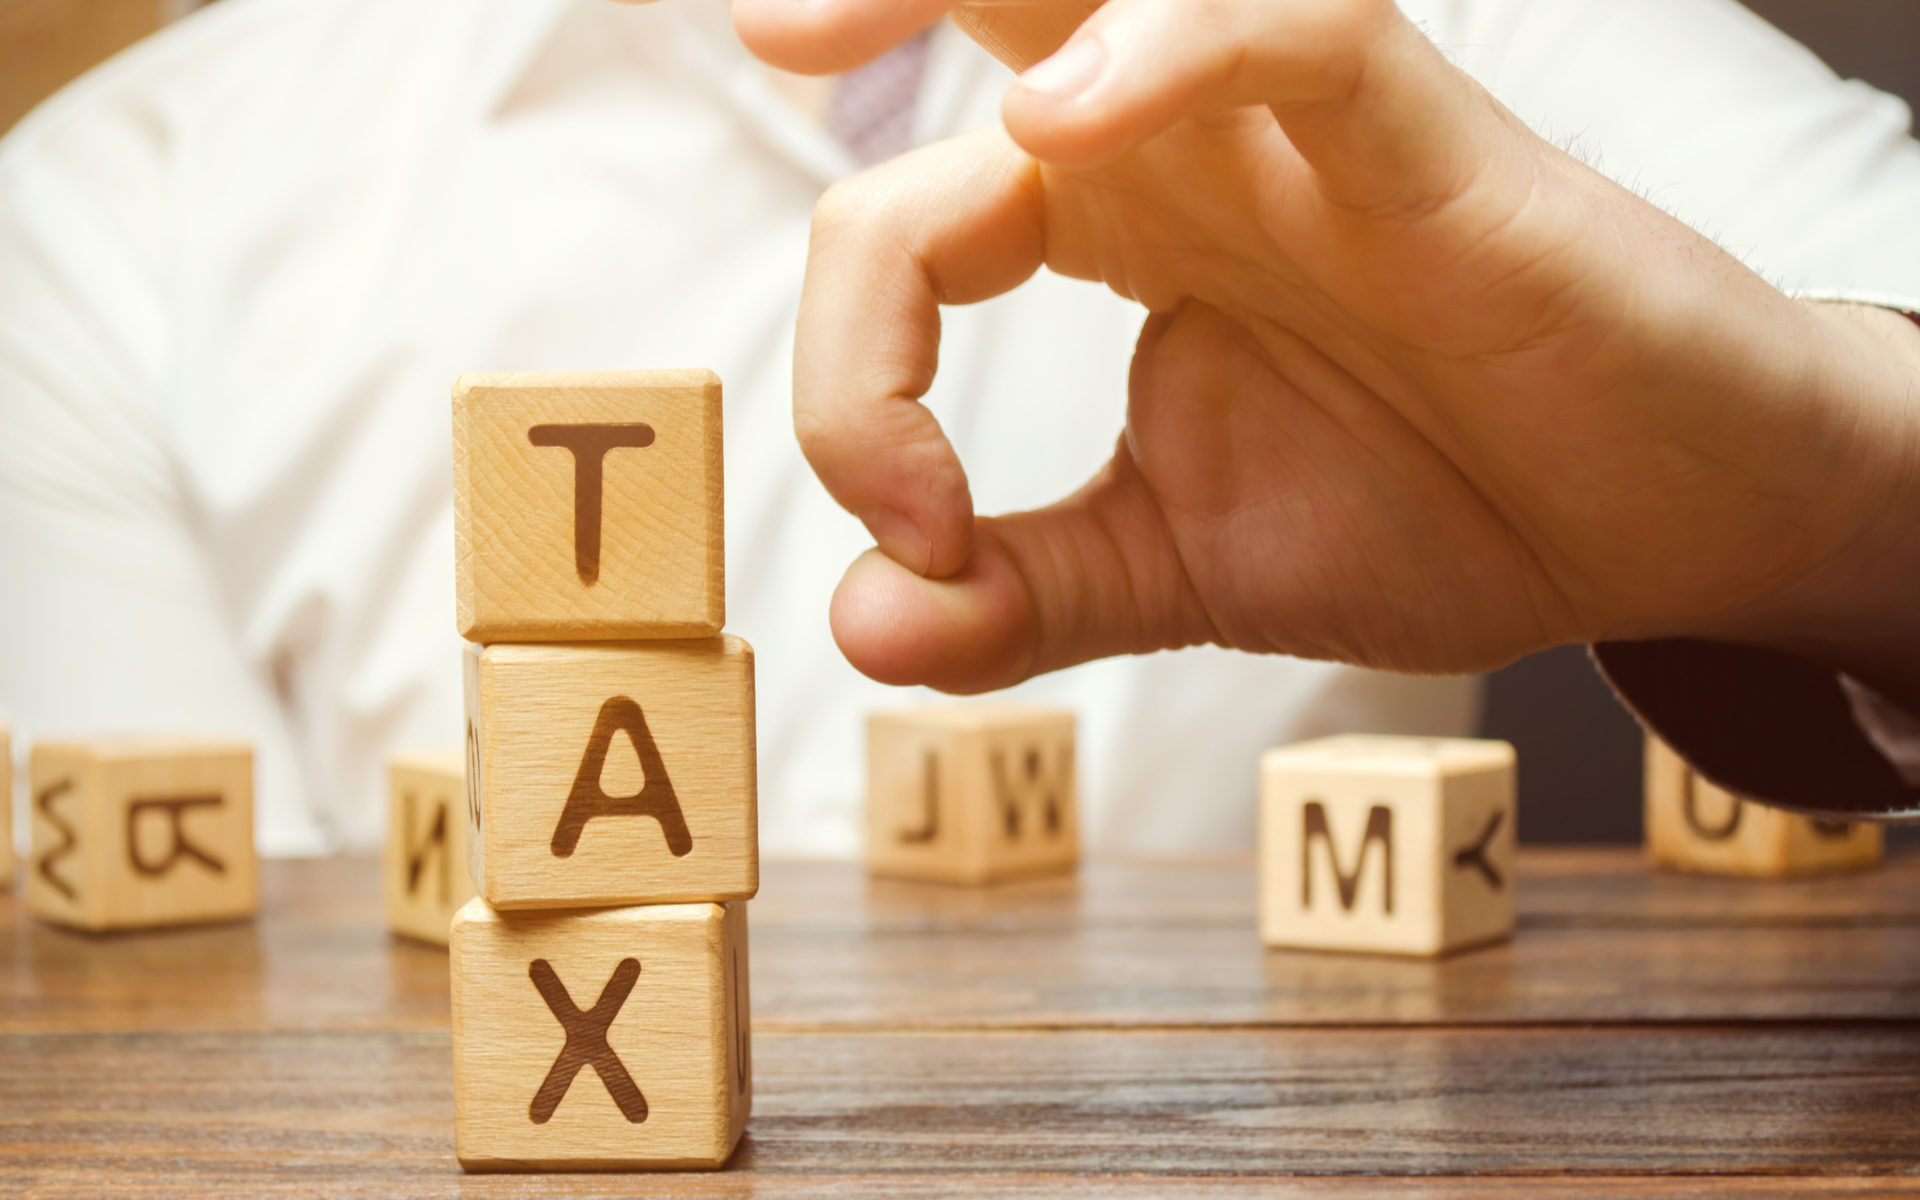 singapore exempting bitcoin from tax